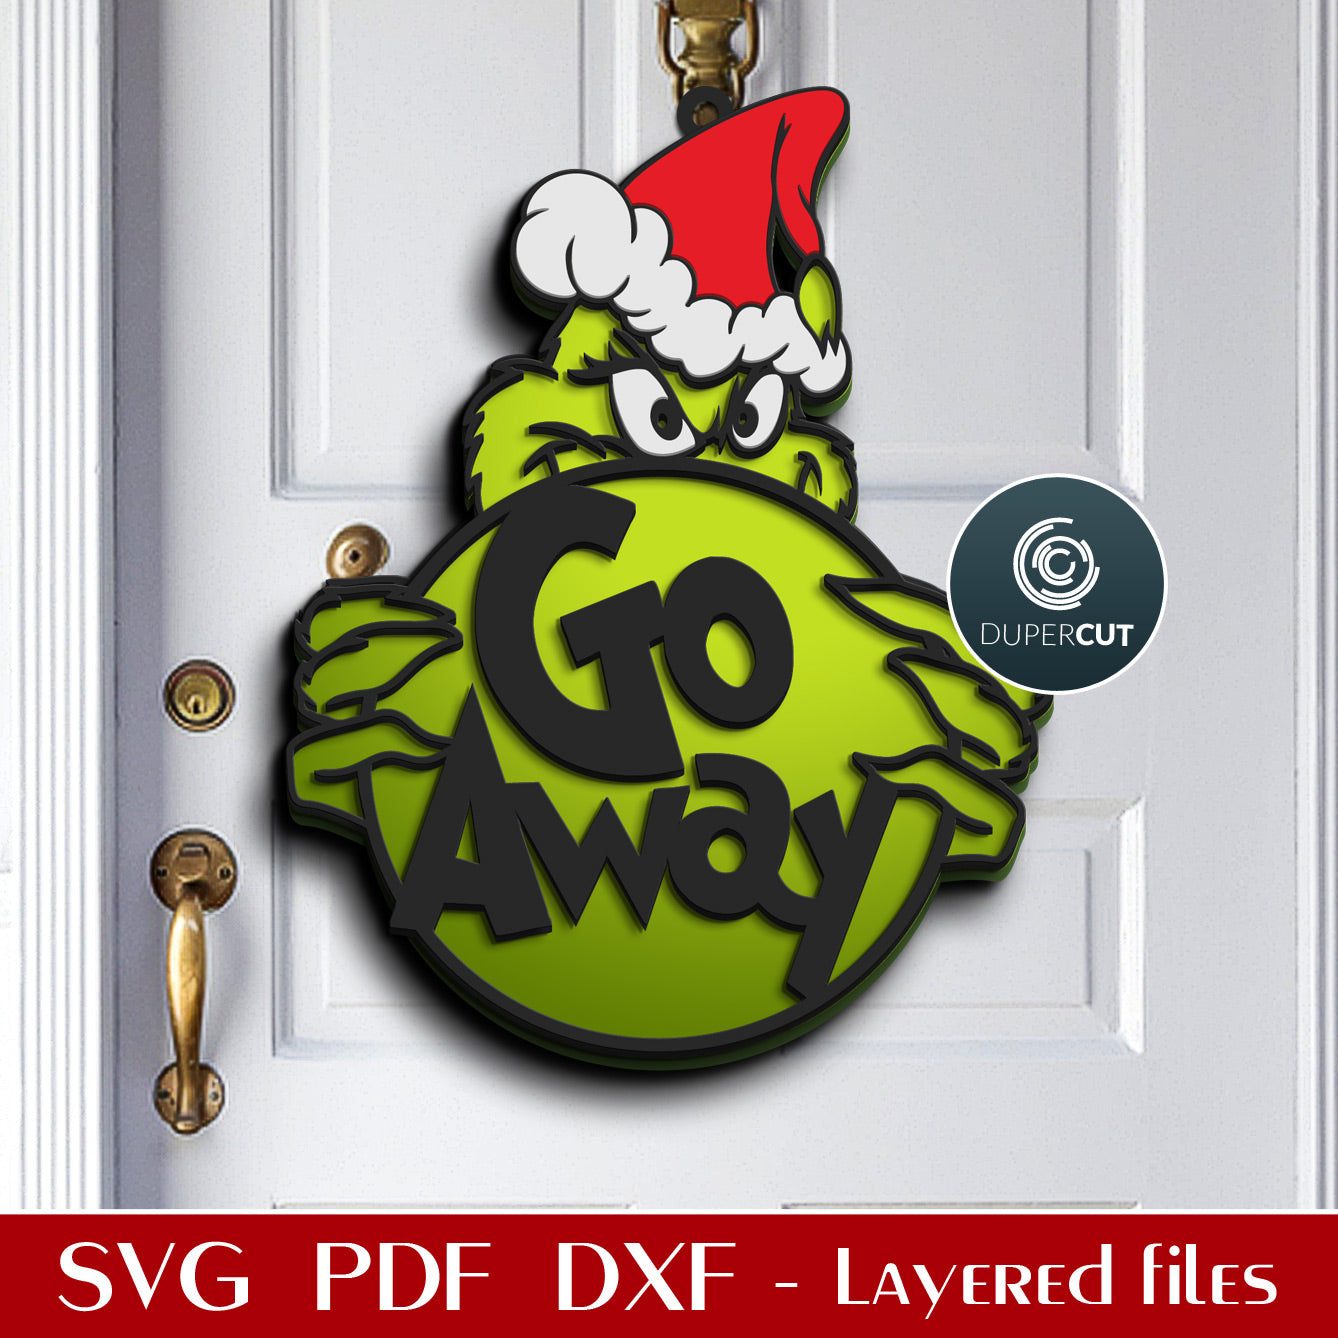 Grinch funny door sign - go away template - SVG DXF laser cutting vector files for Glowforge, Cricut, Silhouette cameo, CNC plasma machines by DuperCut